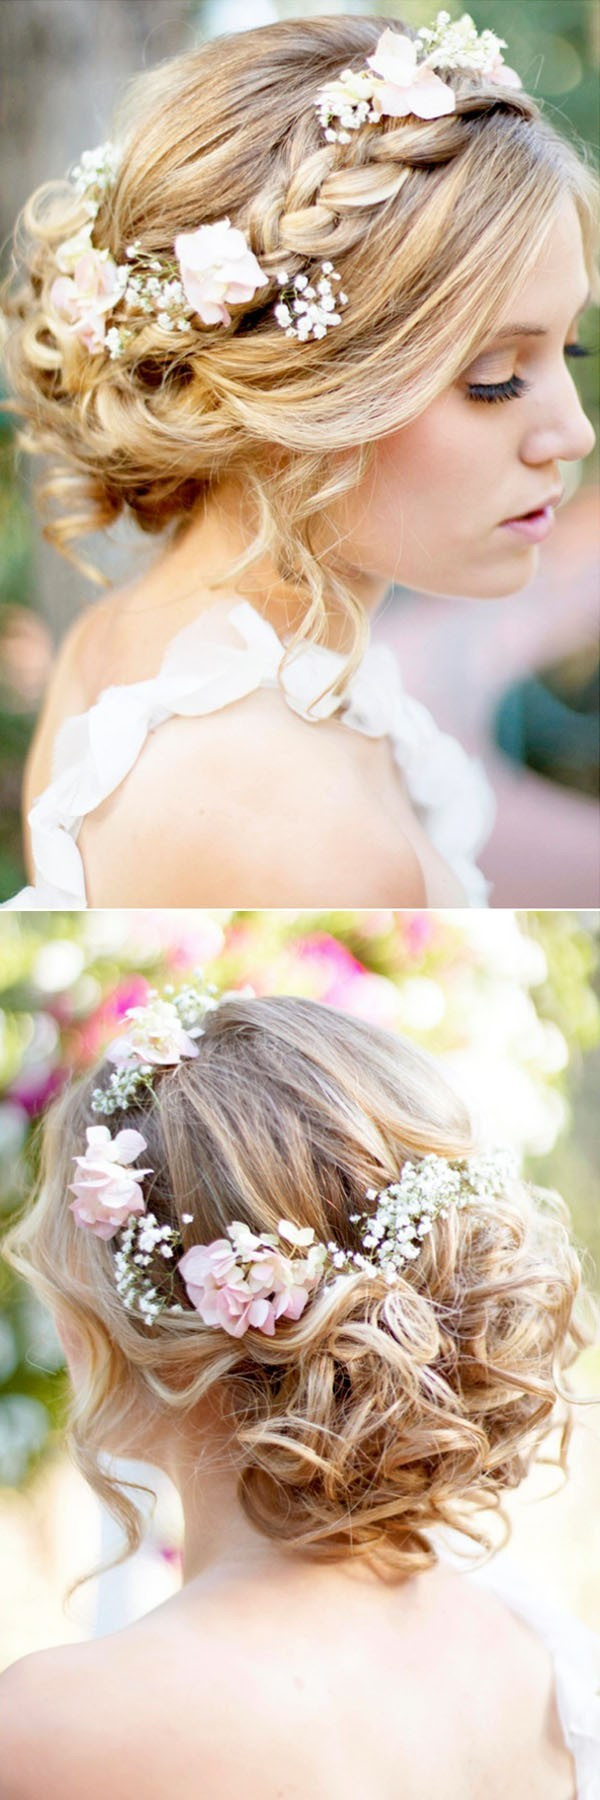 Wedding Hairstyles With Flowers
 18 Trending Wedding Hairstyles with Flowers Oh Best Day Ever